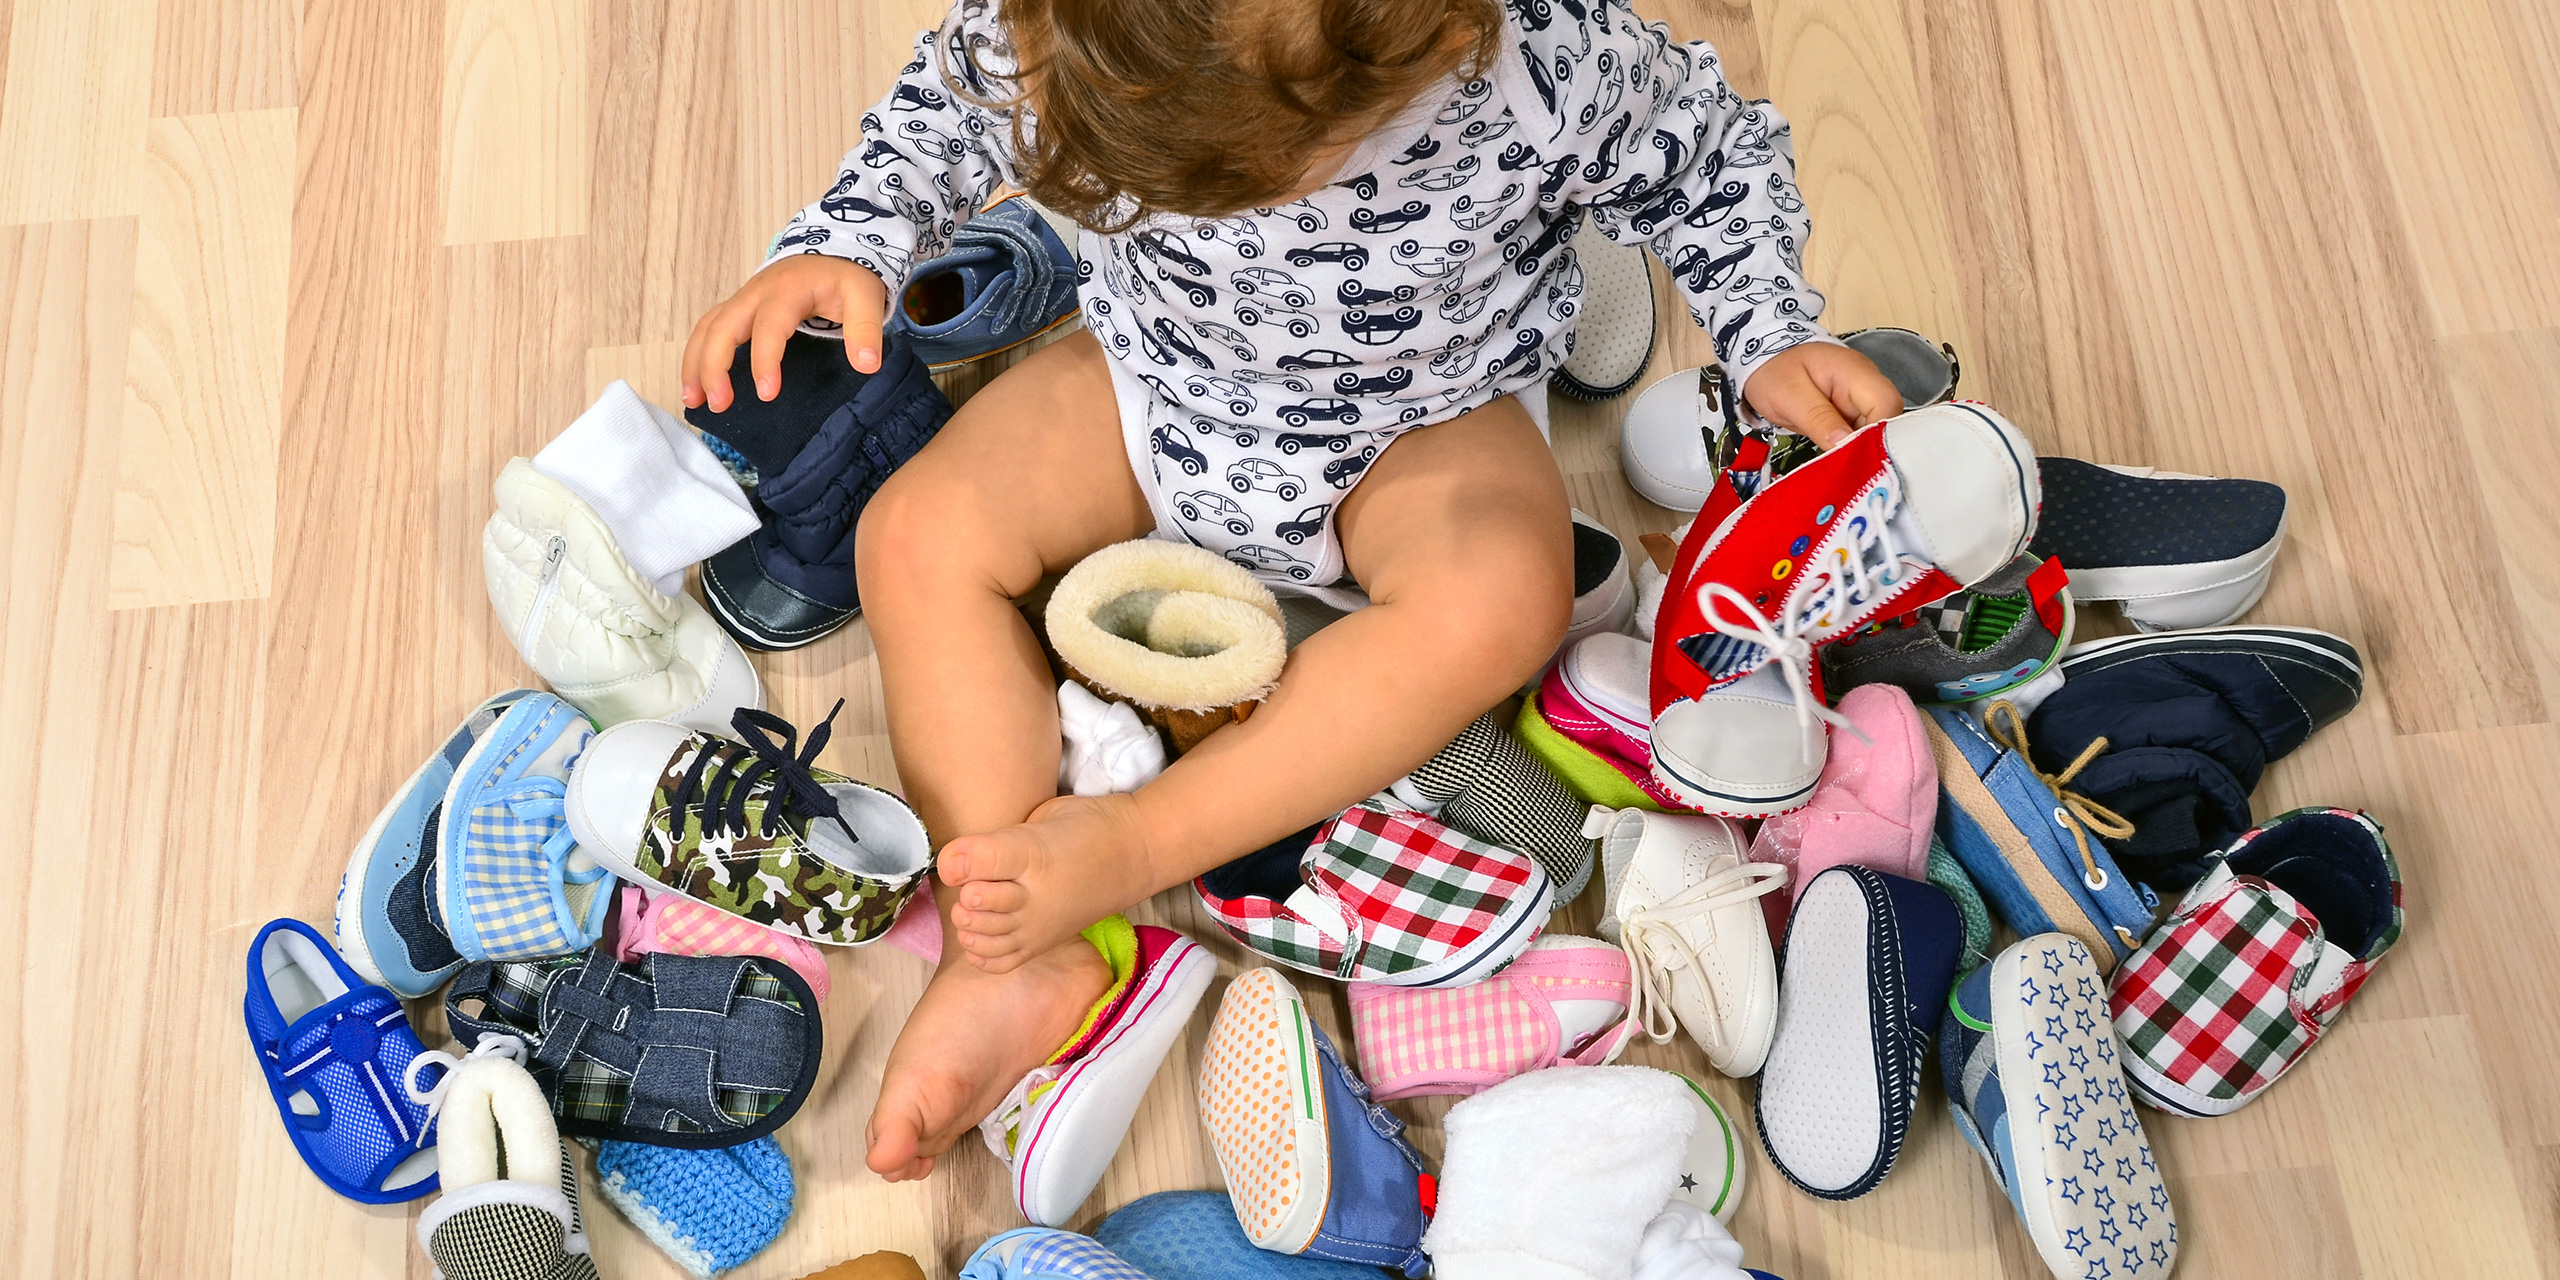 Toddler playing with a lot of baby shoes. ; Courtesy of Iulian Valentin/Shutterstock